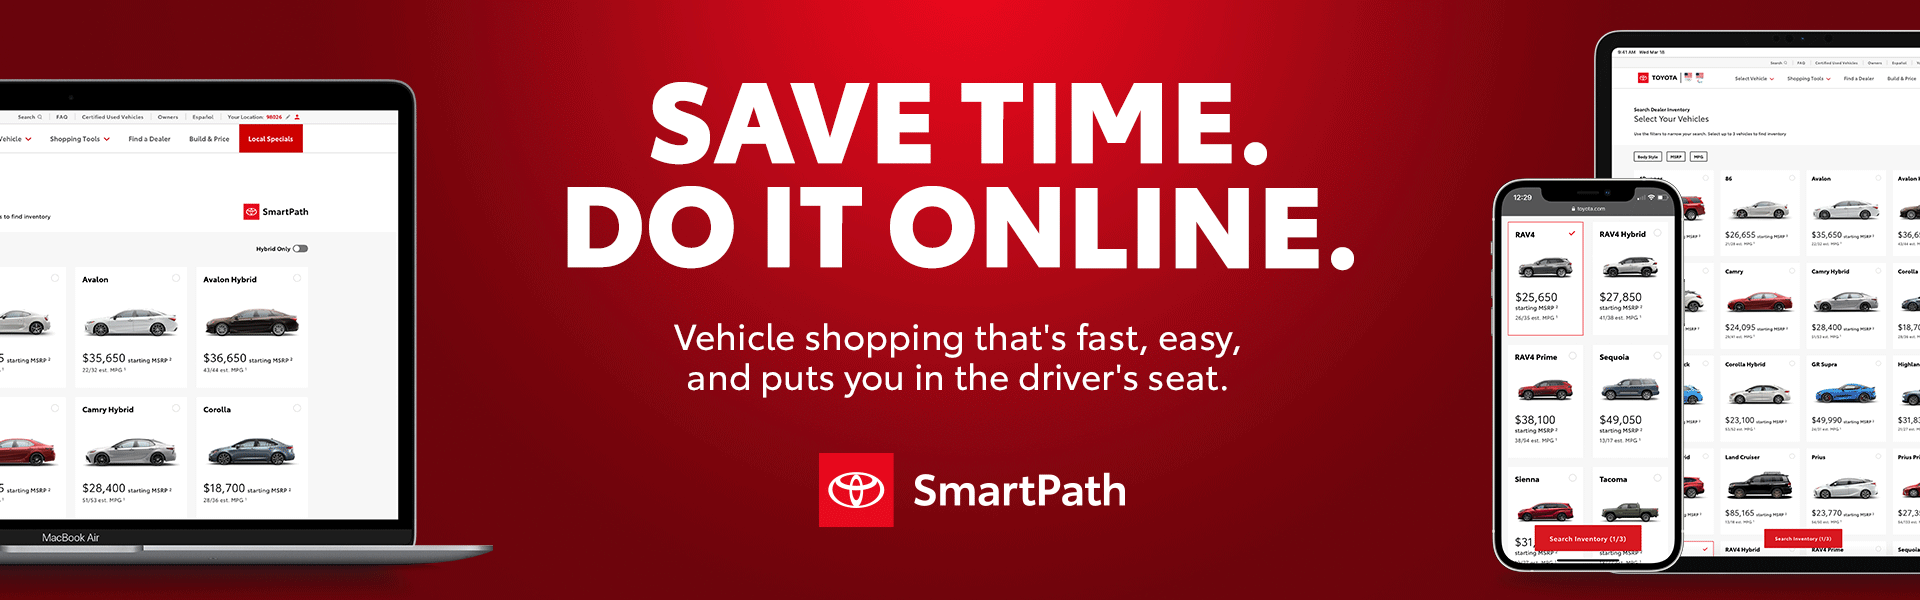 Save Time. Do It Online.